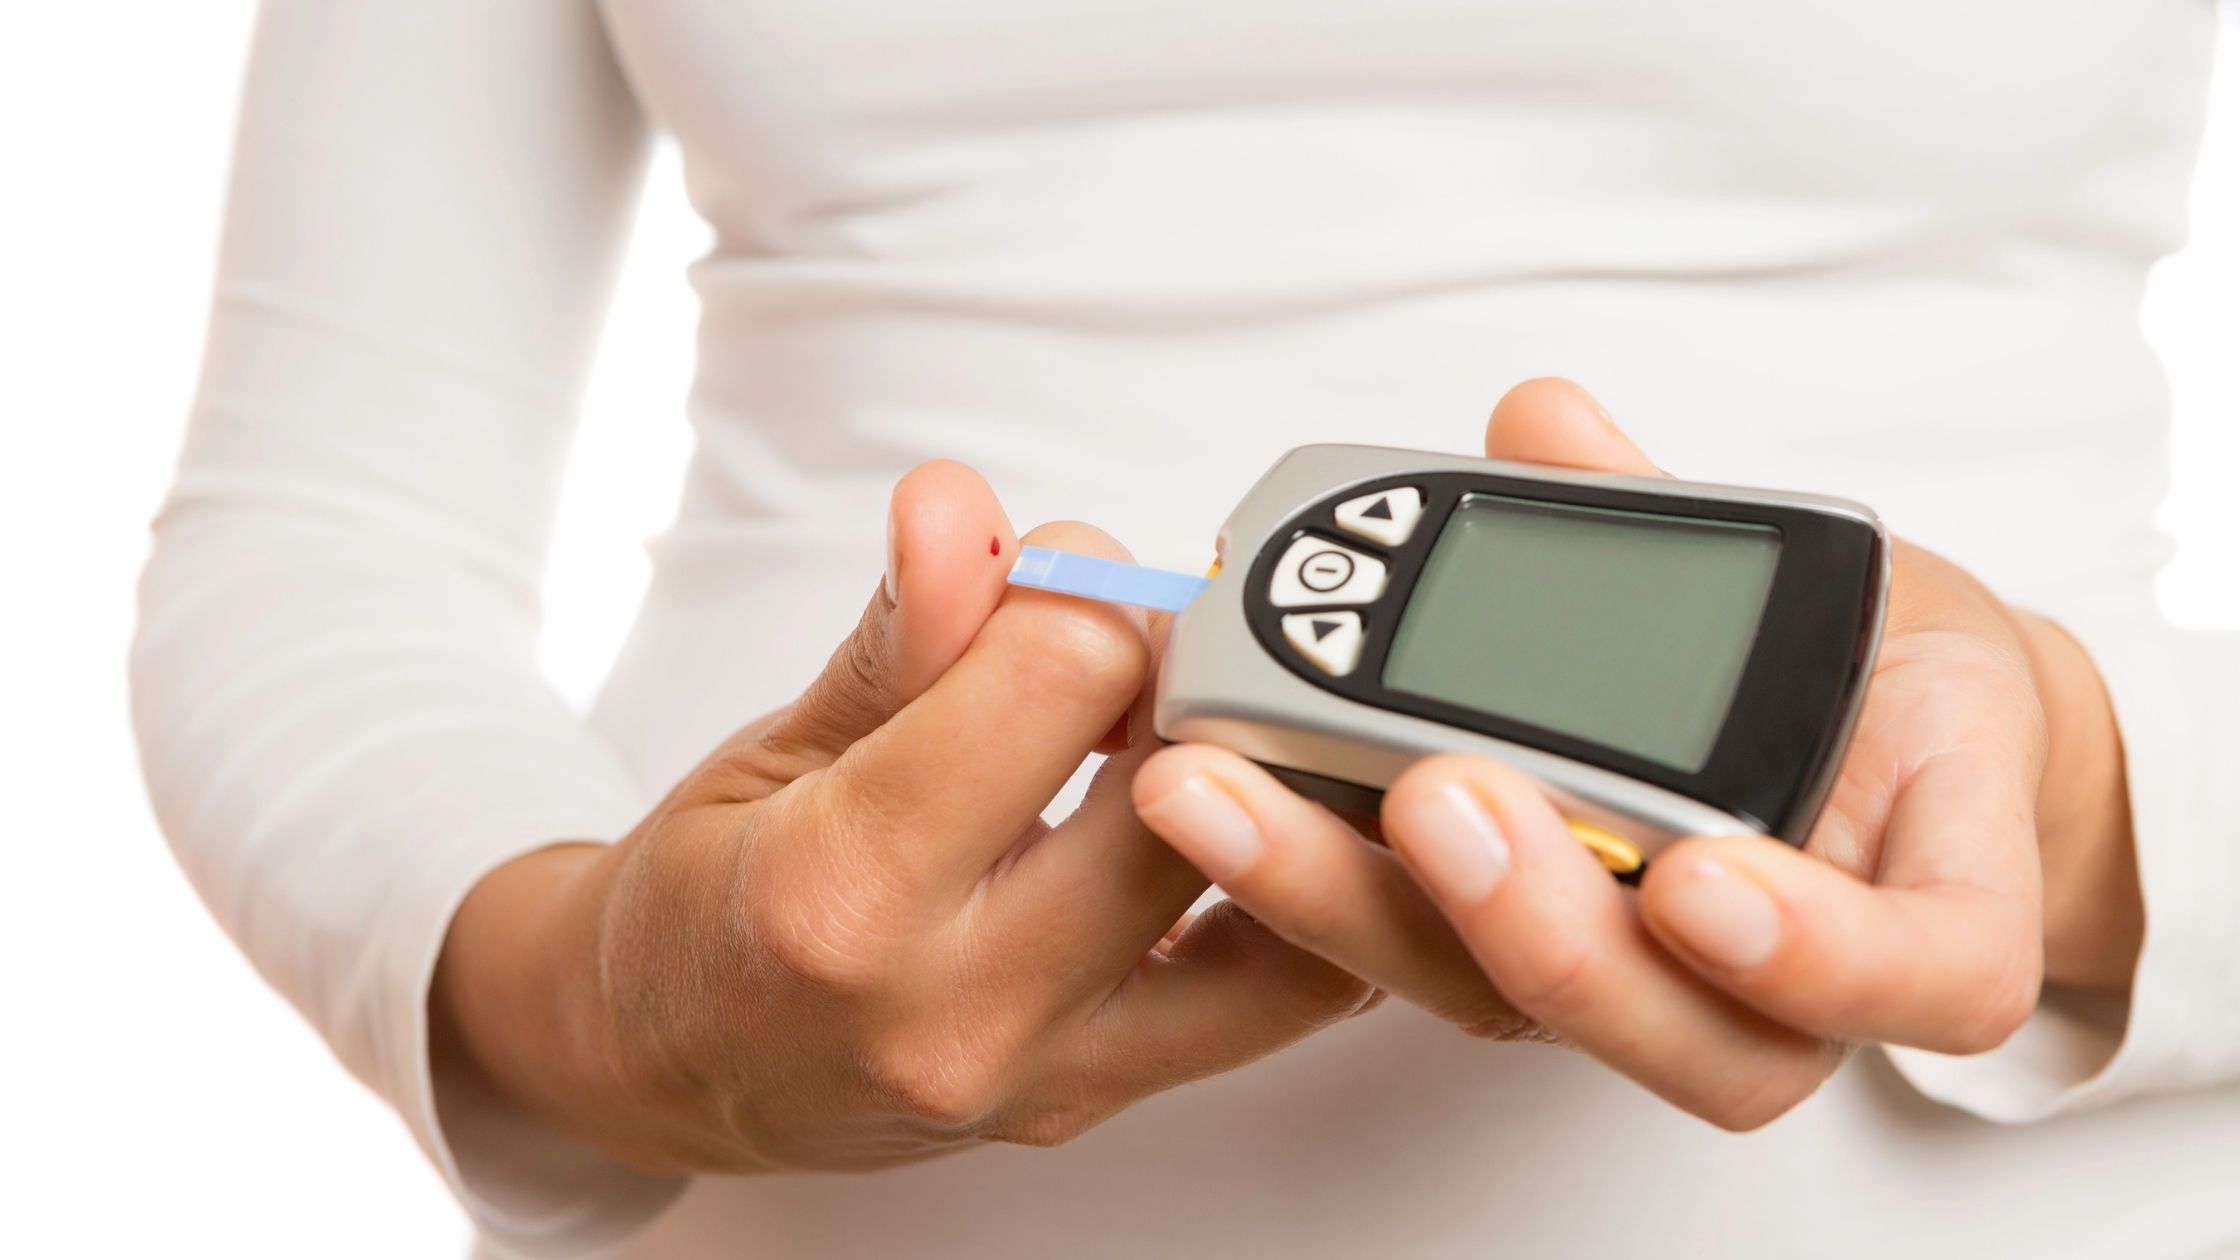 Using a blood ketone meter to determine if you are in ketosis